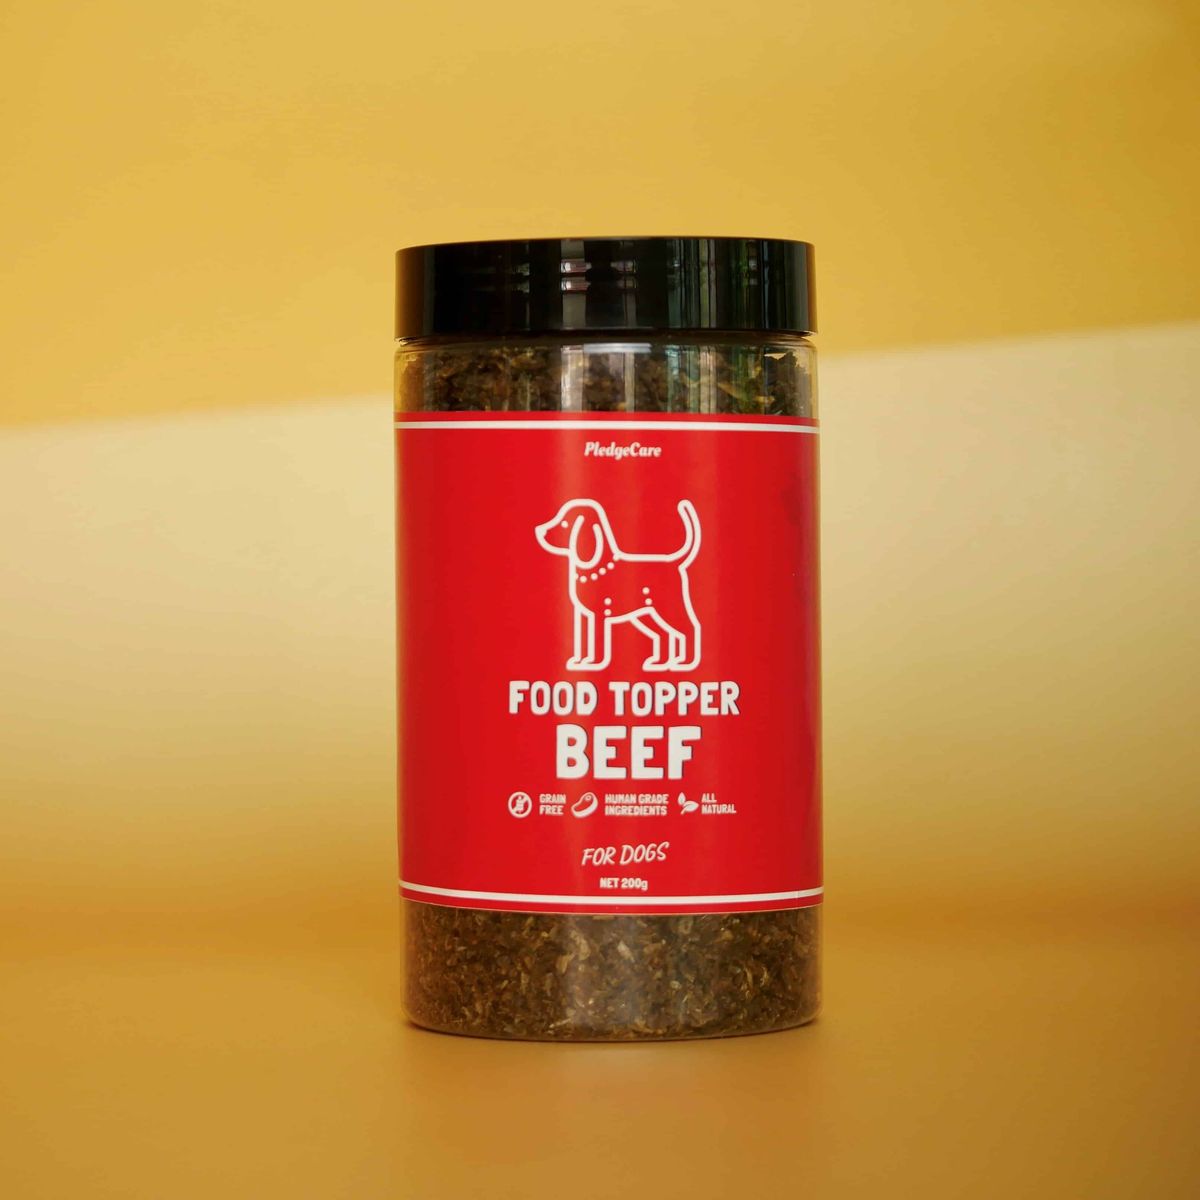 food topper for dogs with beef flavour